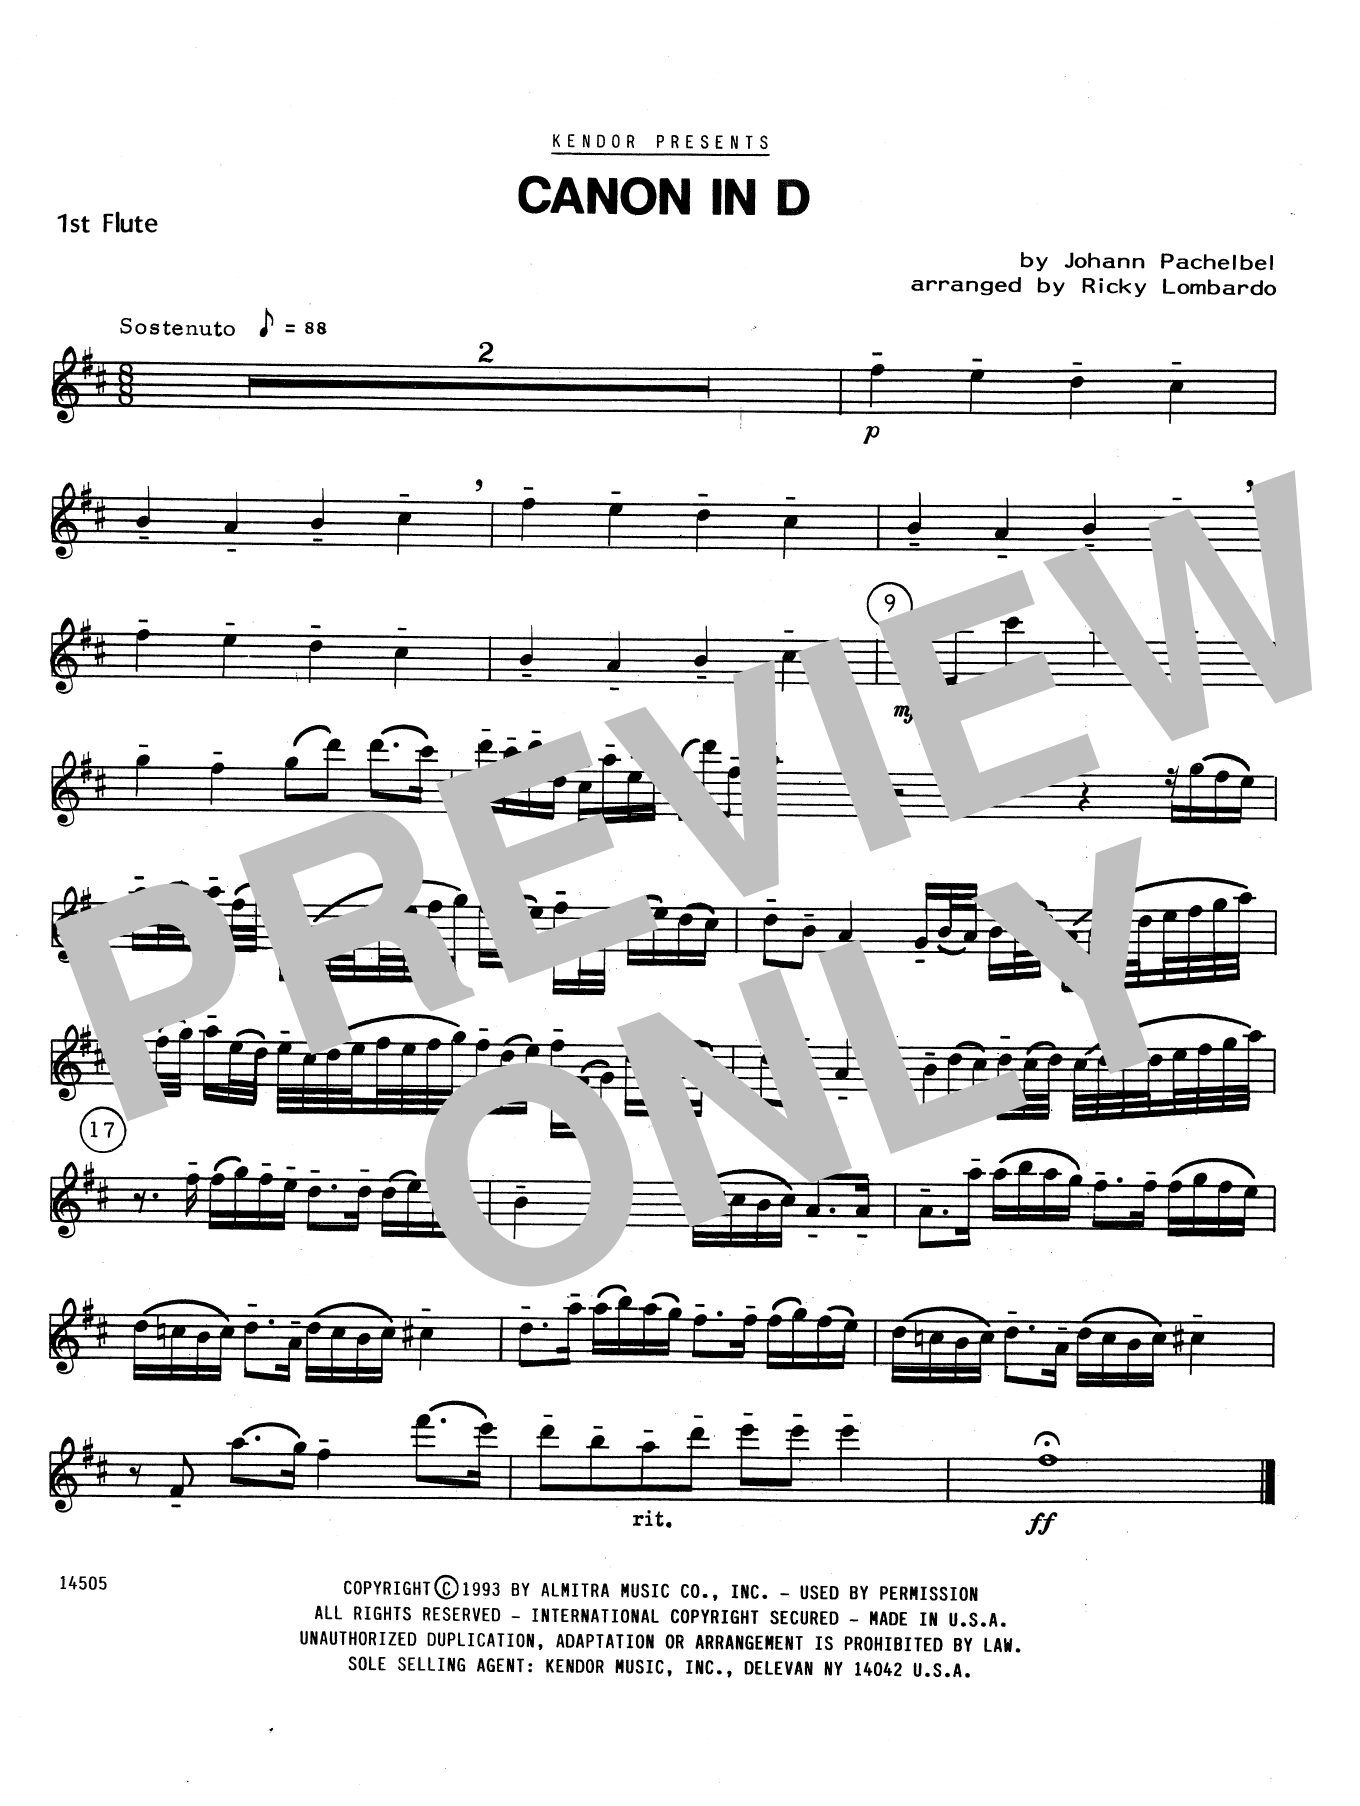 Download Ricky Lombardo Canon In D - 1st Flute Sheet Music